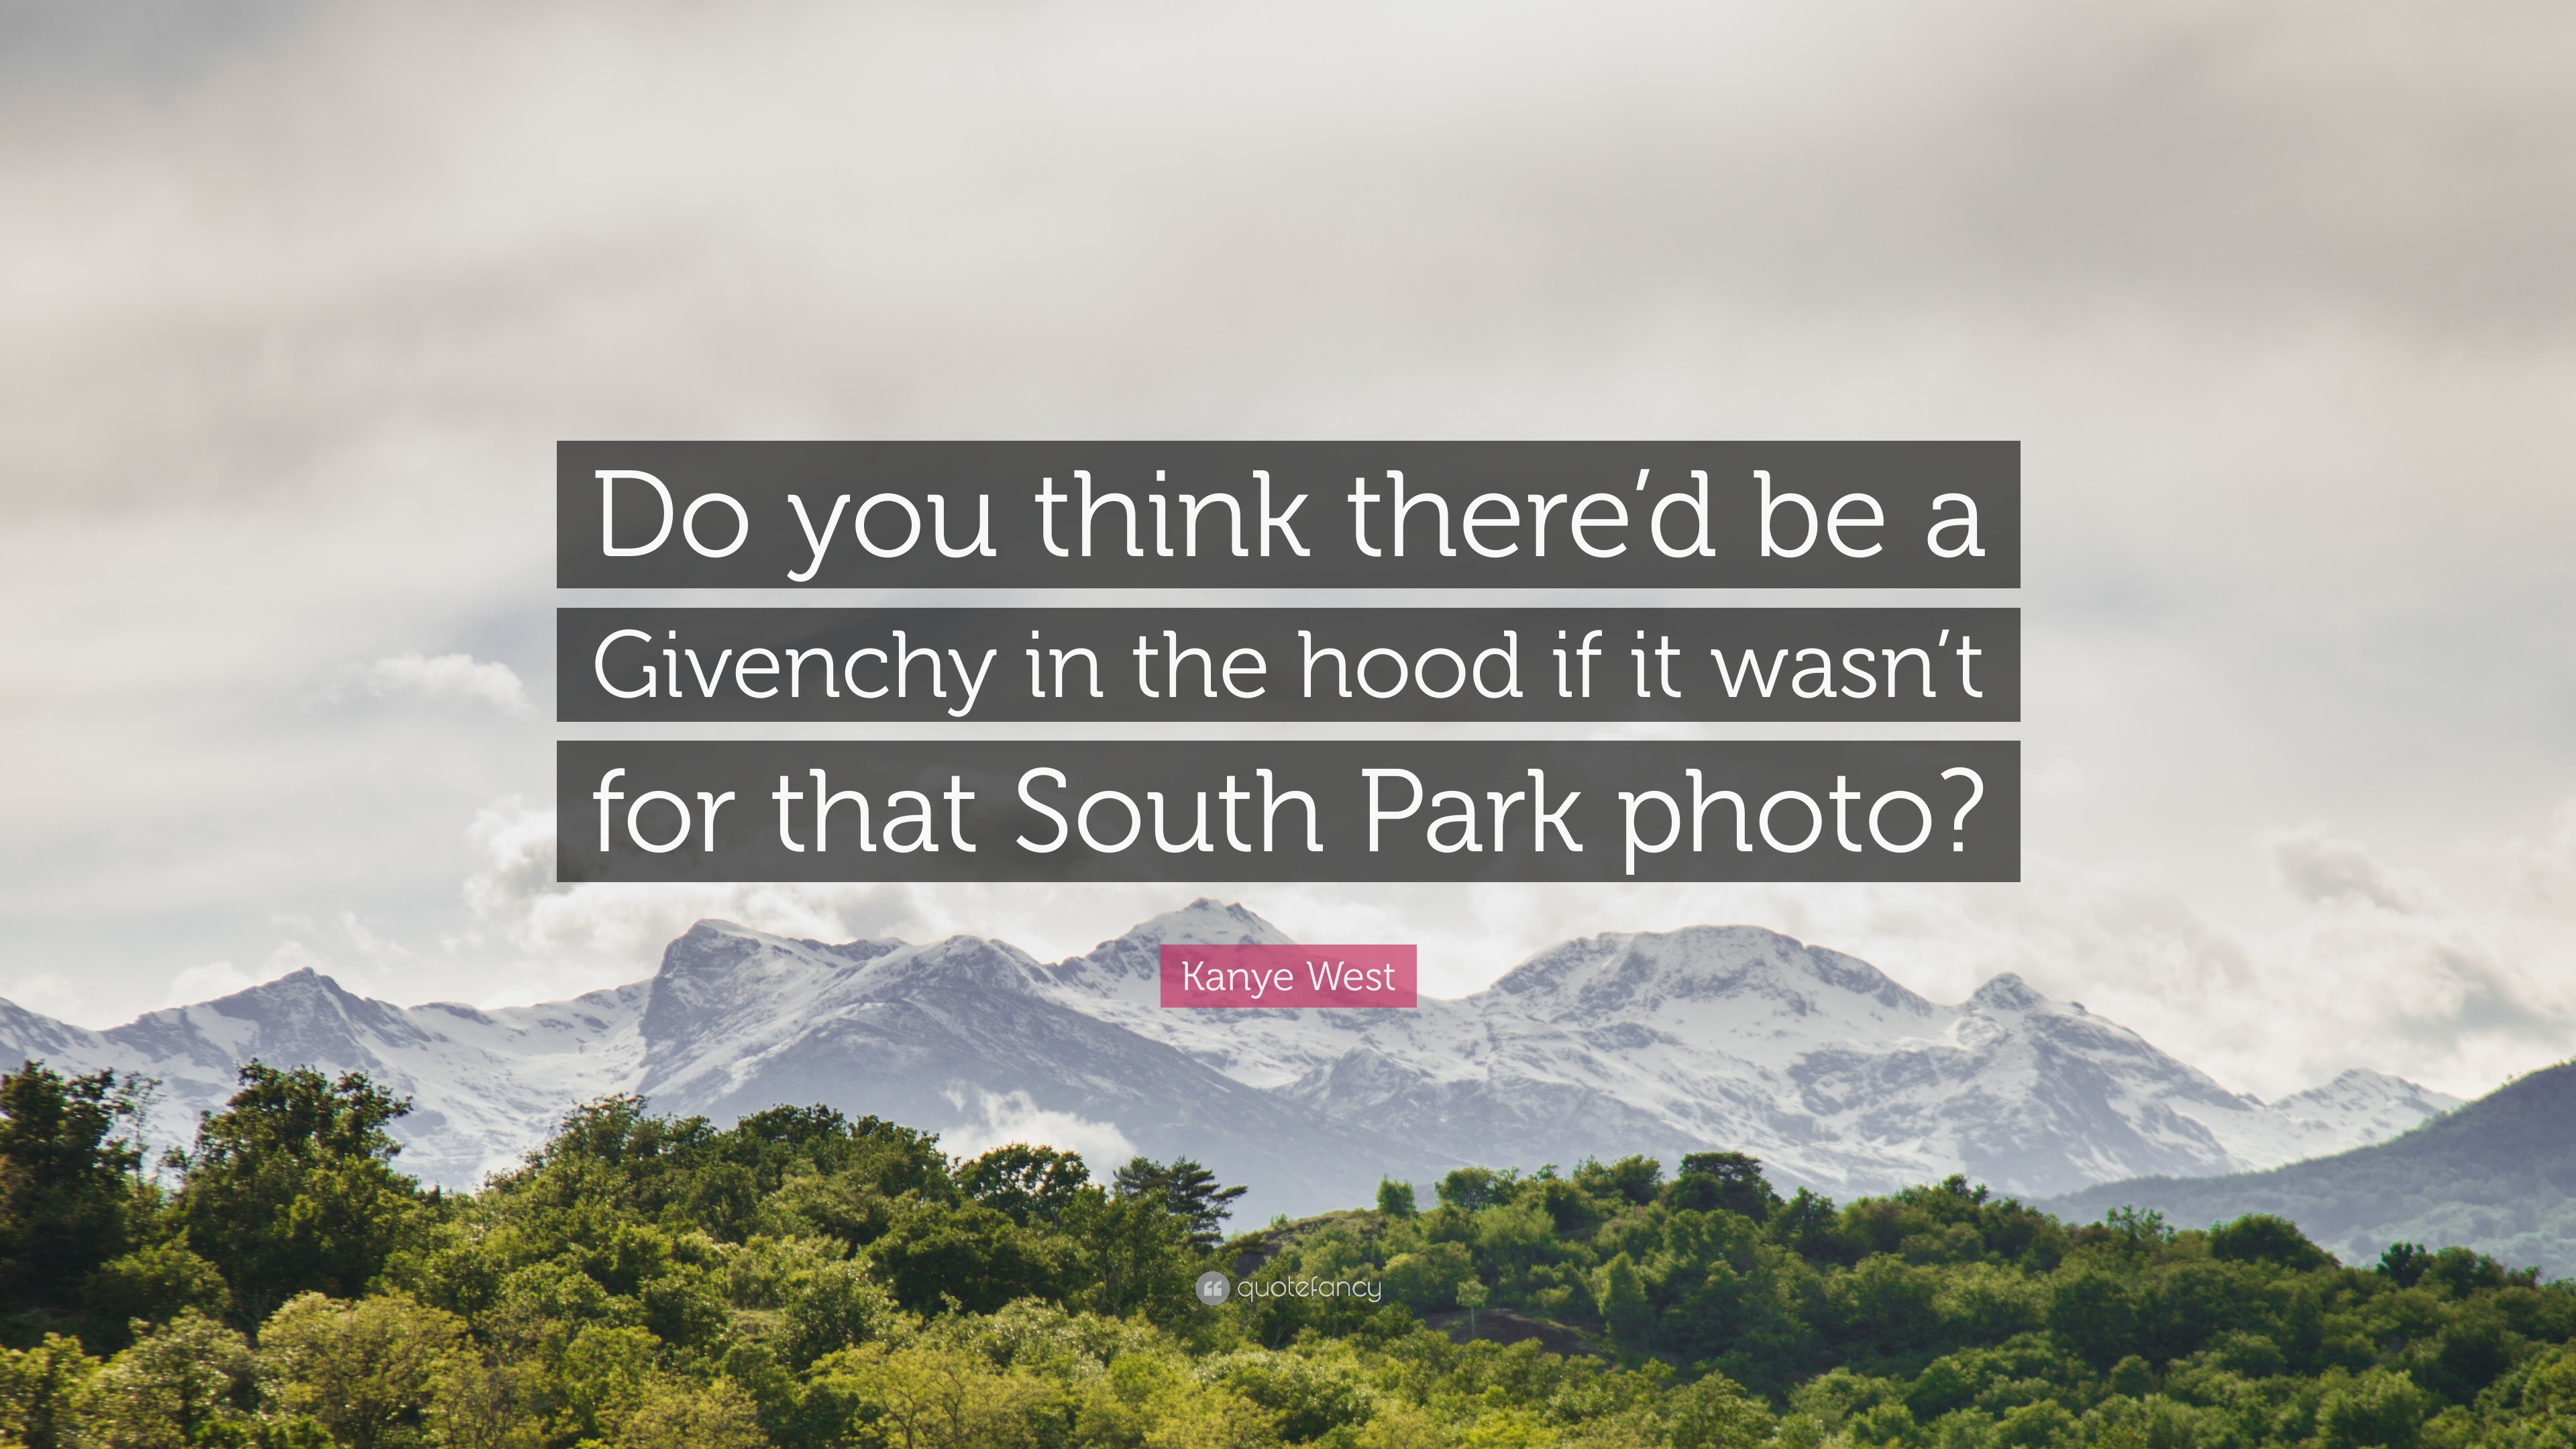 Kanye West Quote: “Do you think there'd be a Givenchy in the hood if it